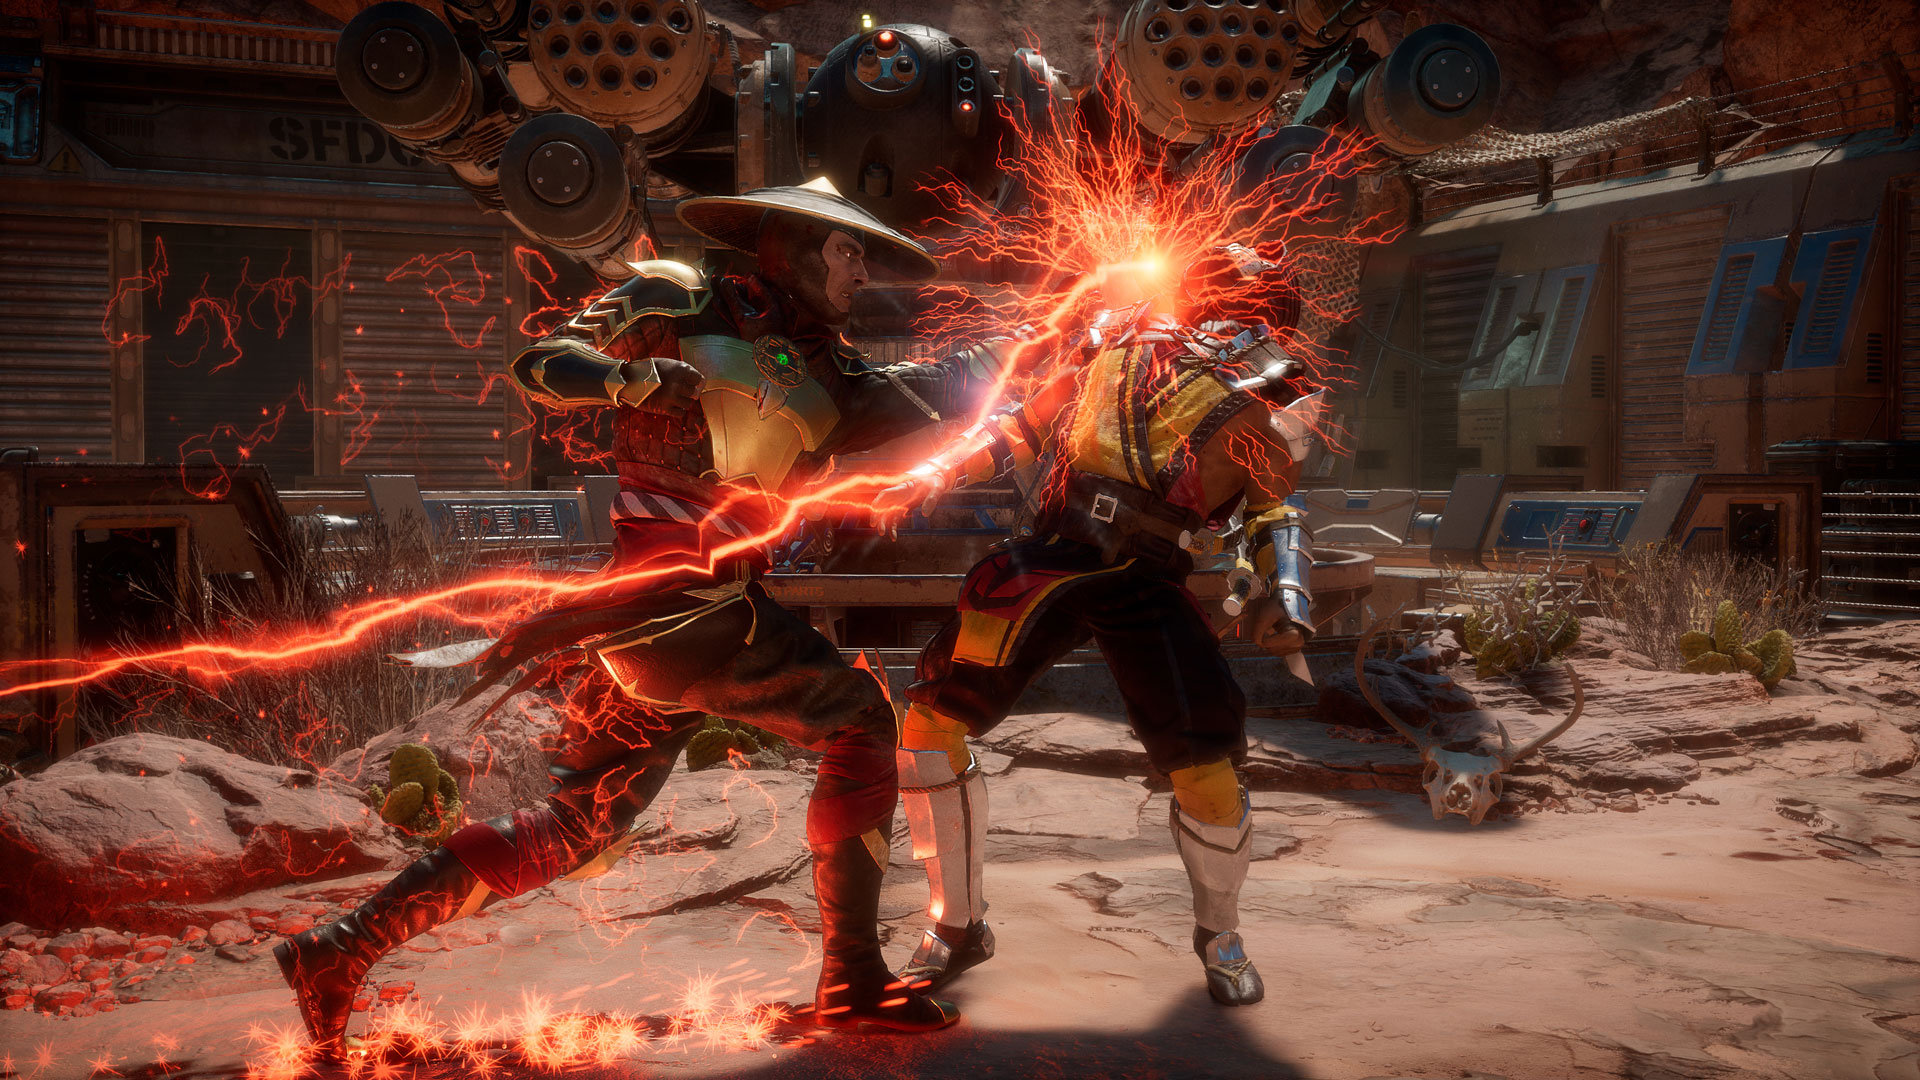 Mortal Kombat 11's Official Fatalities Trailer Shows Lots of Blood and